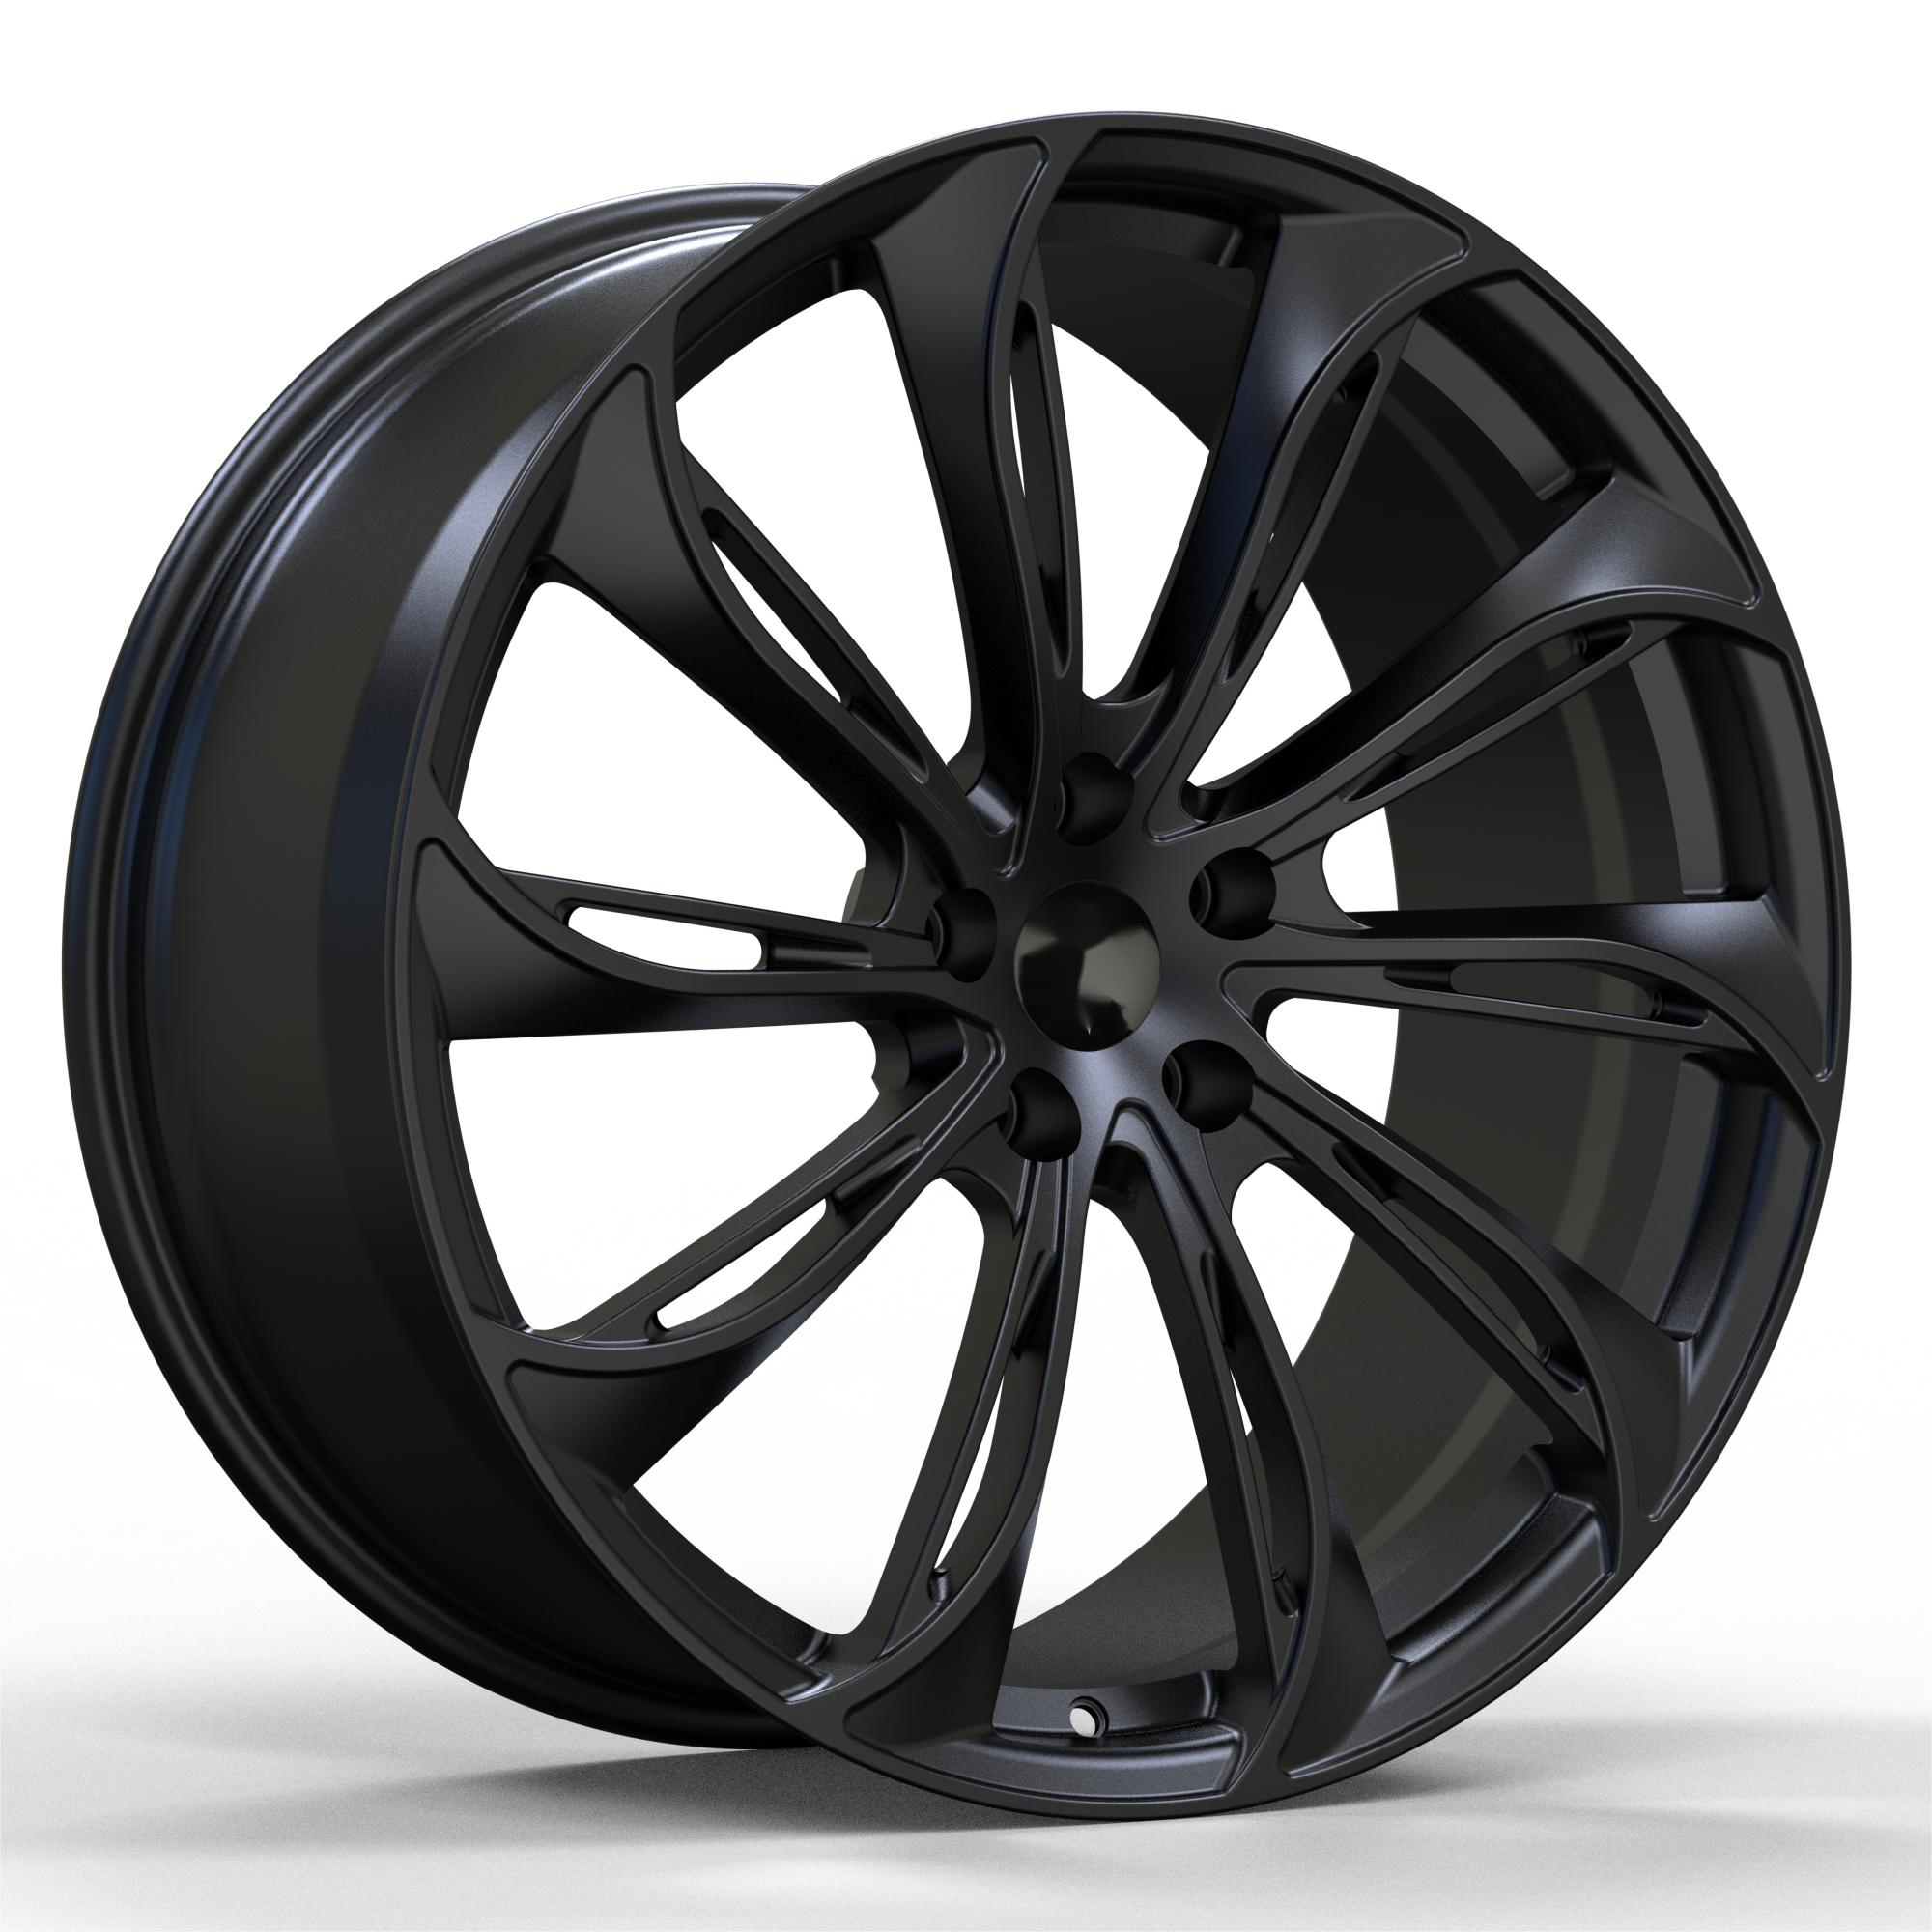 Tesla OEM factory Rims for Model 3/Y/S/X 【Style 4(Set of 4)】 - Tesery Official Store - Tesla Premium Accessories Store